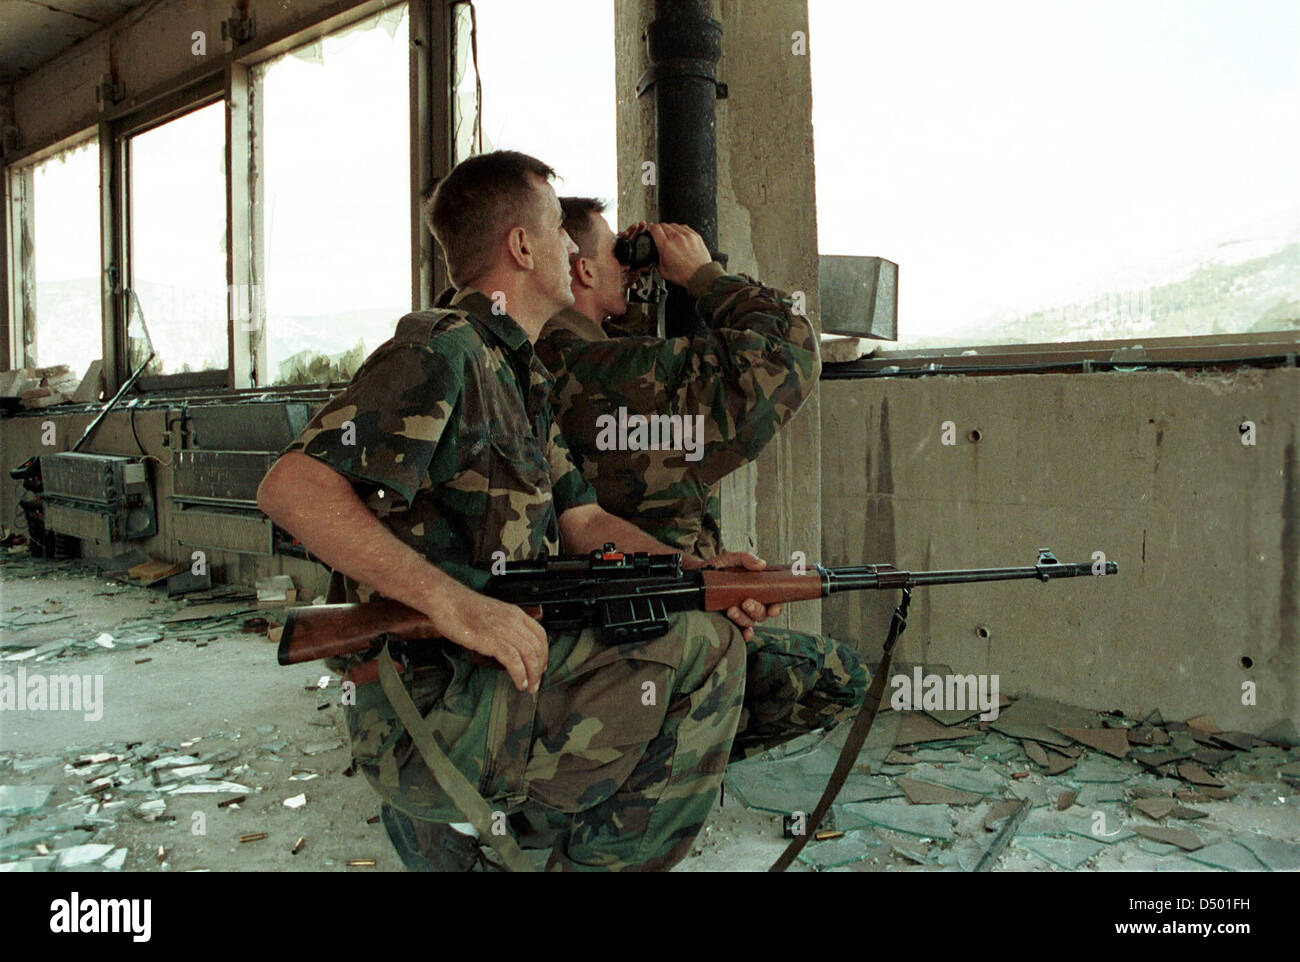 MOSTAR, BOSNIA, 16 AUGUST 1993 --- A Bosnian-Croat HVO sniper team peers out of a destroyed bank building at Bosnian-Moslem civilians on the east side of this divided city. Stock Photo